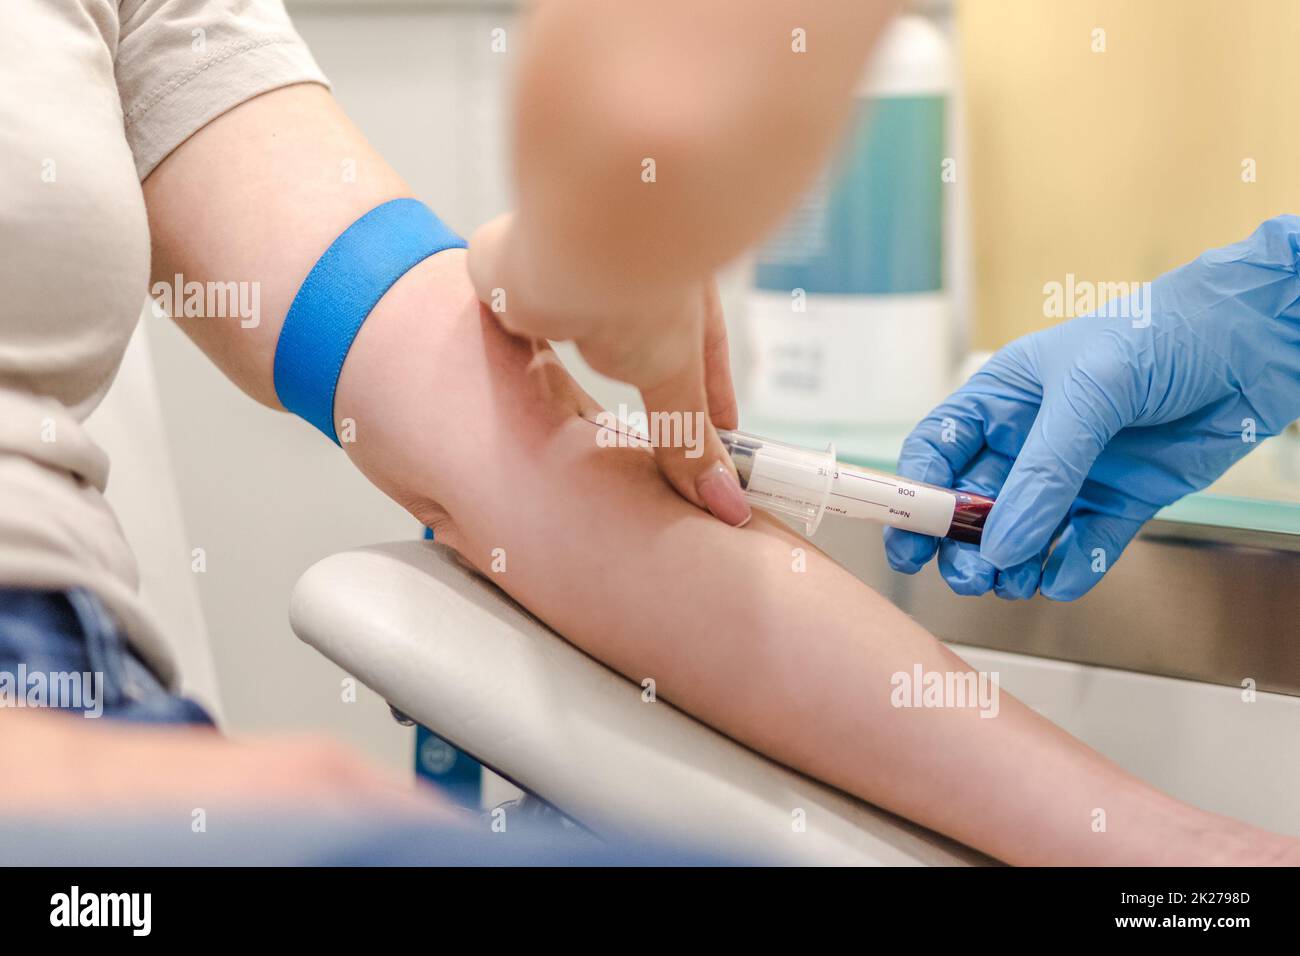 Close-up Of Doctor Taking Blood Sample From Patient's Arm in Hospital for Medical Testing. Stock Photo